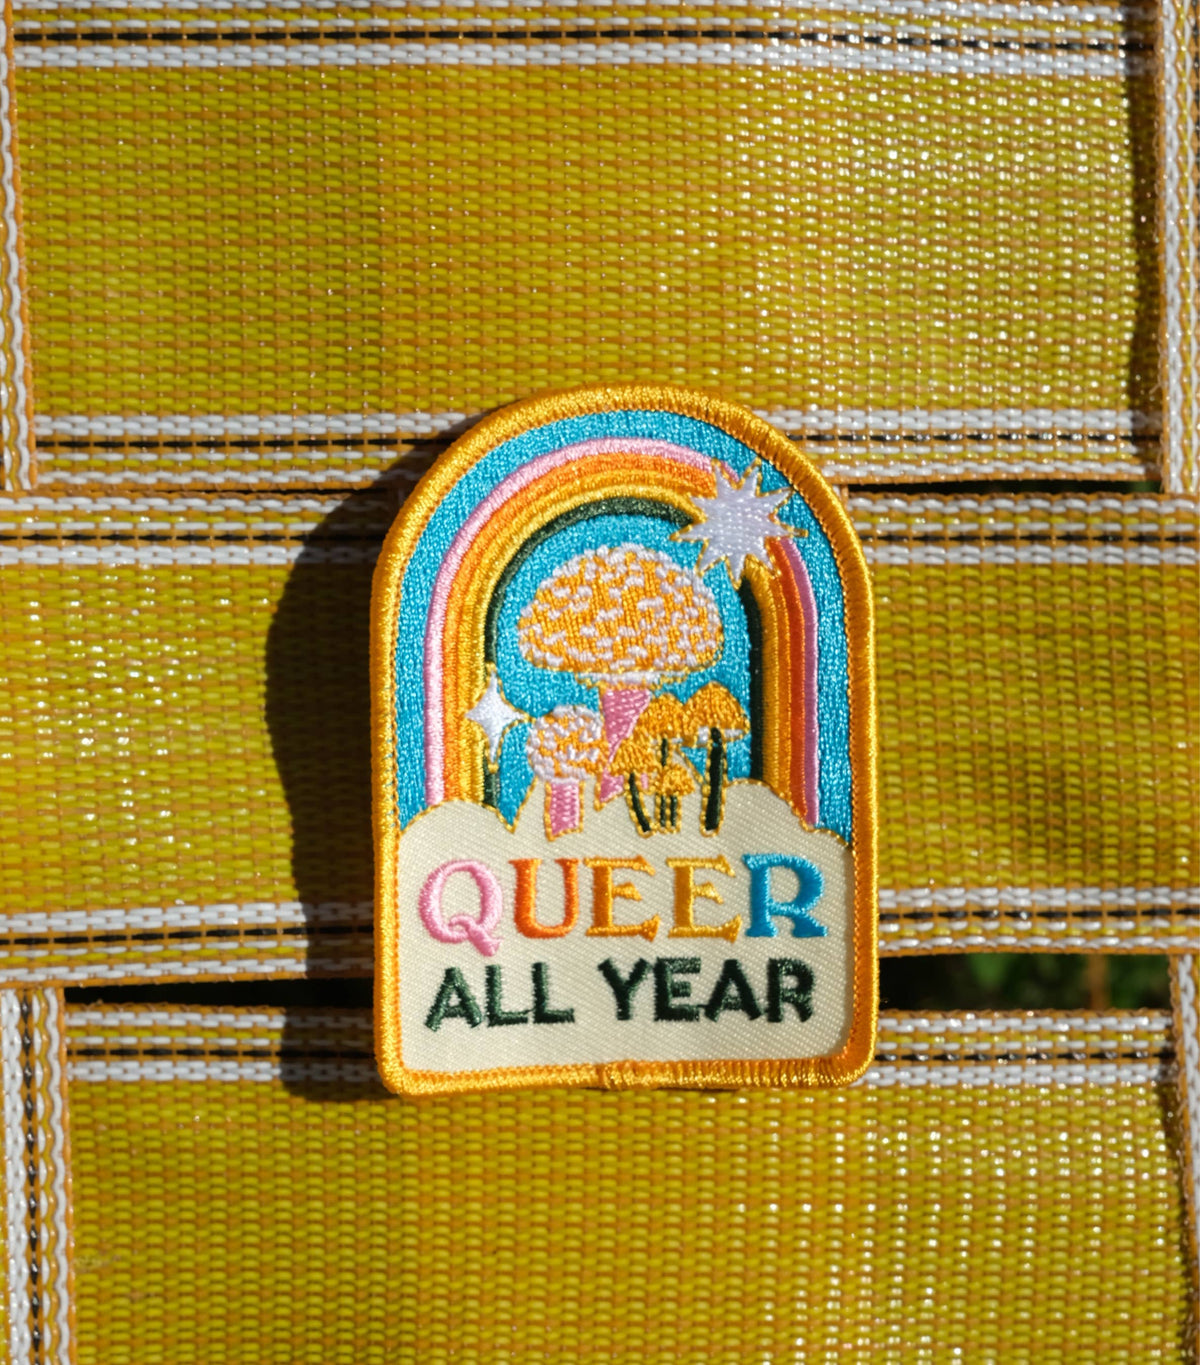 Queer All Year Patch by Ash + Chess